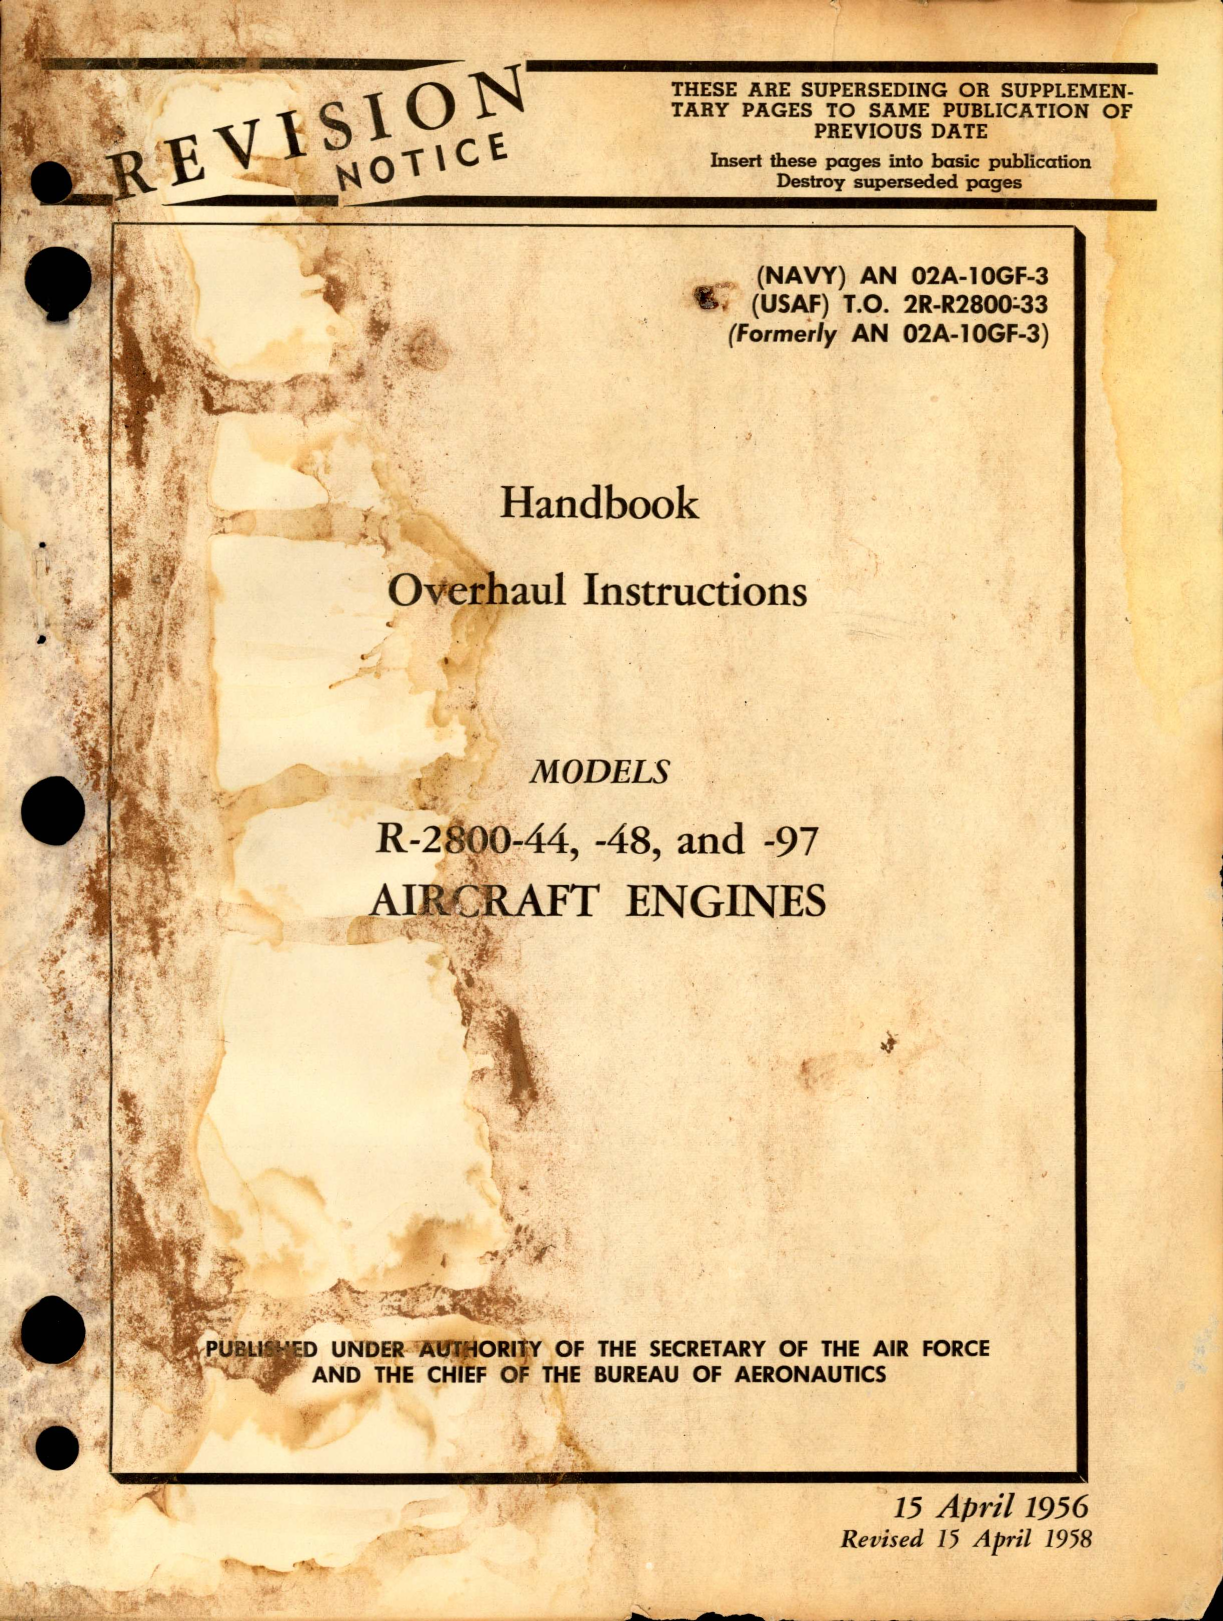 Sample page 5 from AirCorps Library document: Overhaul Instructions for Models R-2800-44, -48, and -97 Engines